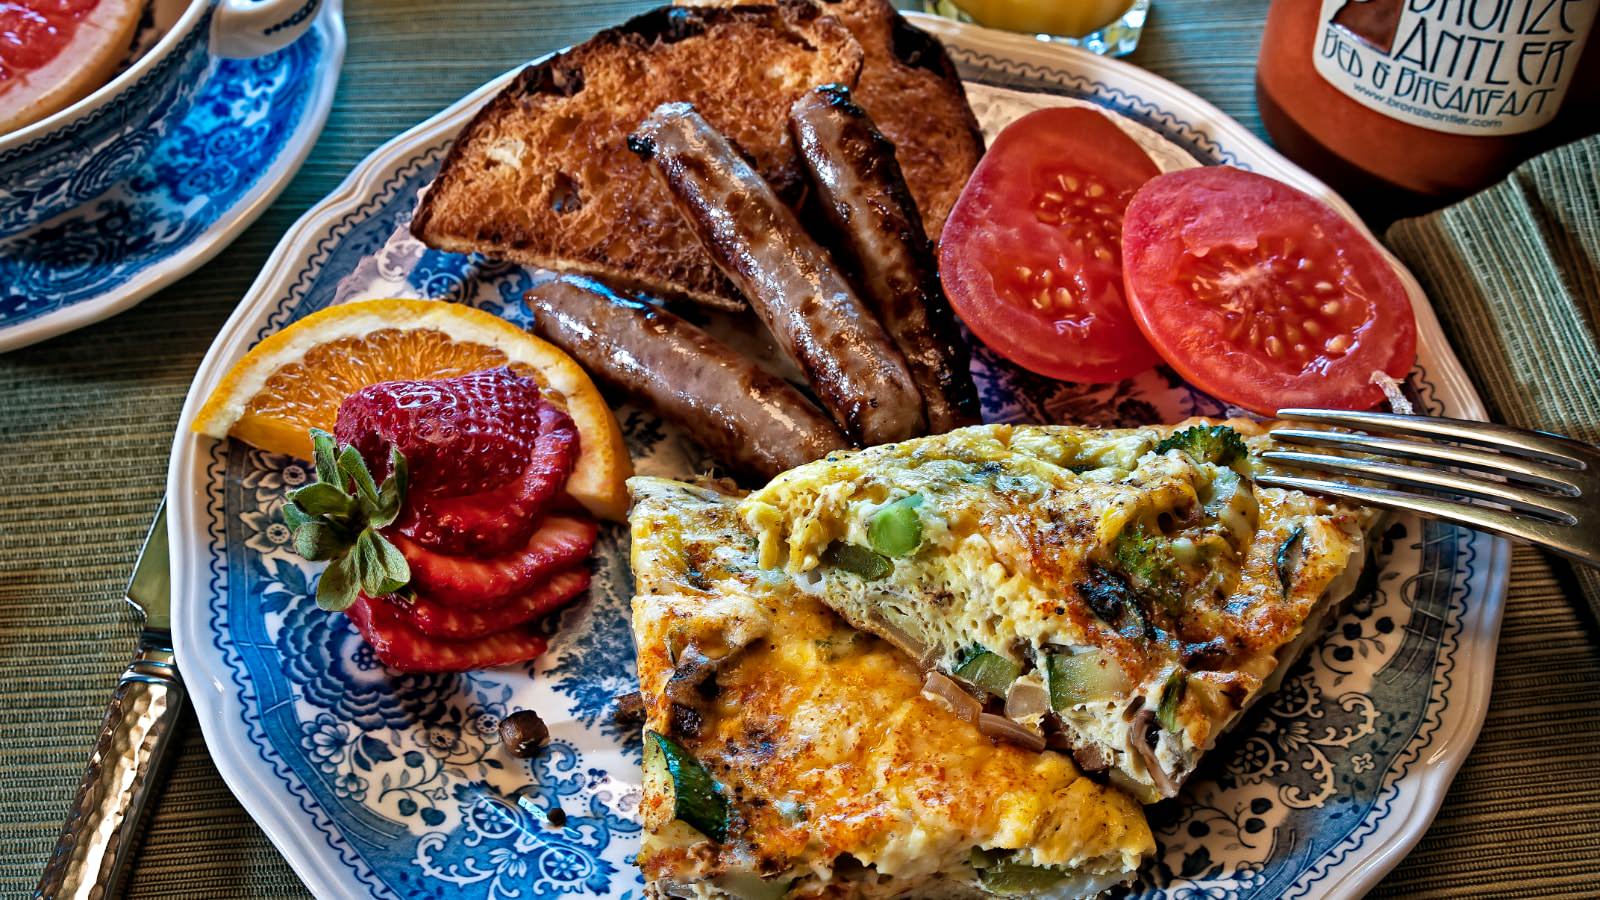 Close up view of blue patterned plate with servings of vegetable quiche, sausage links, toast, and sliced tomatoes, orange, and strawberries